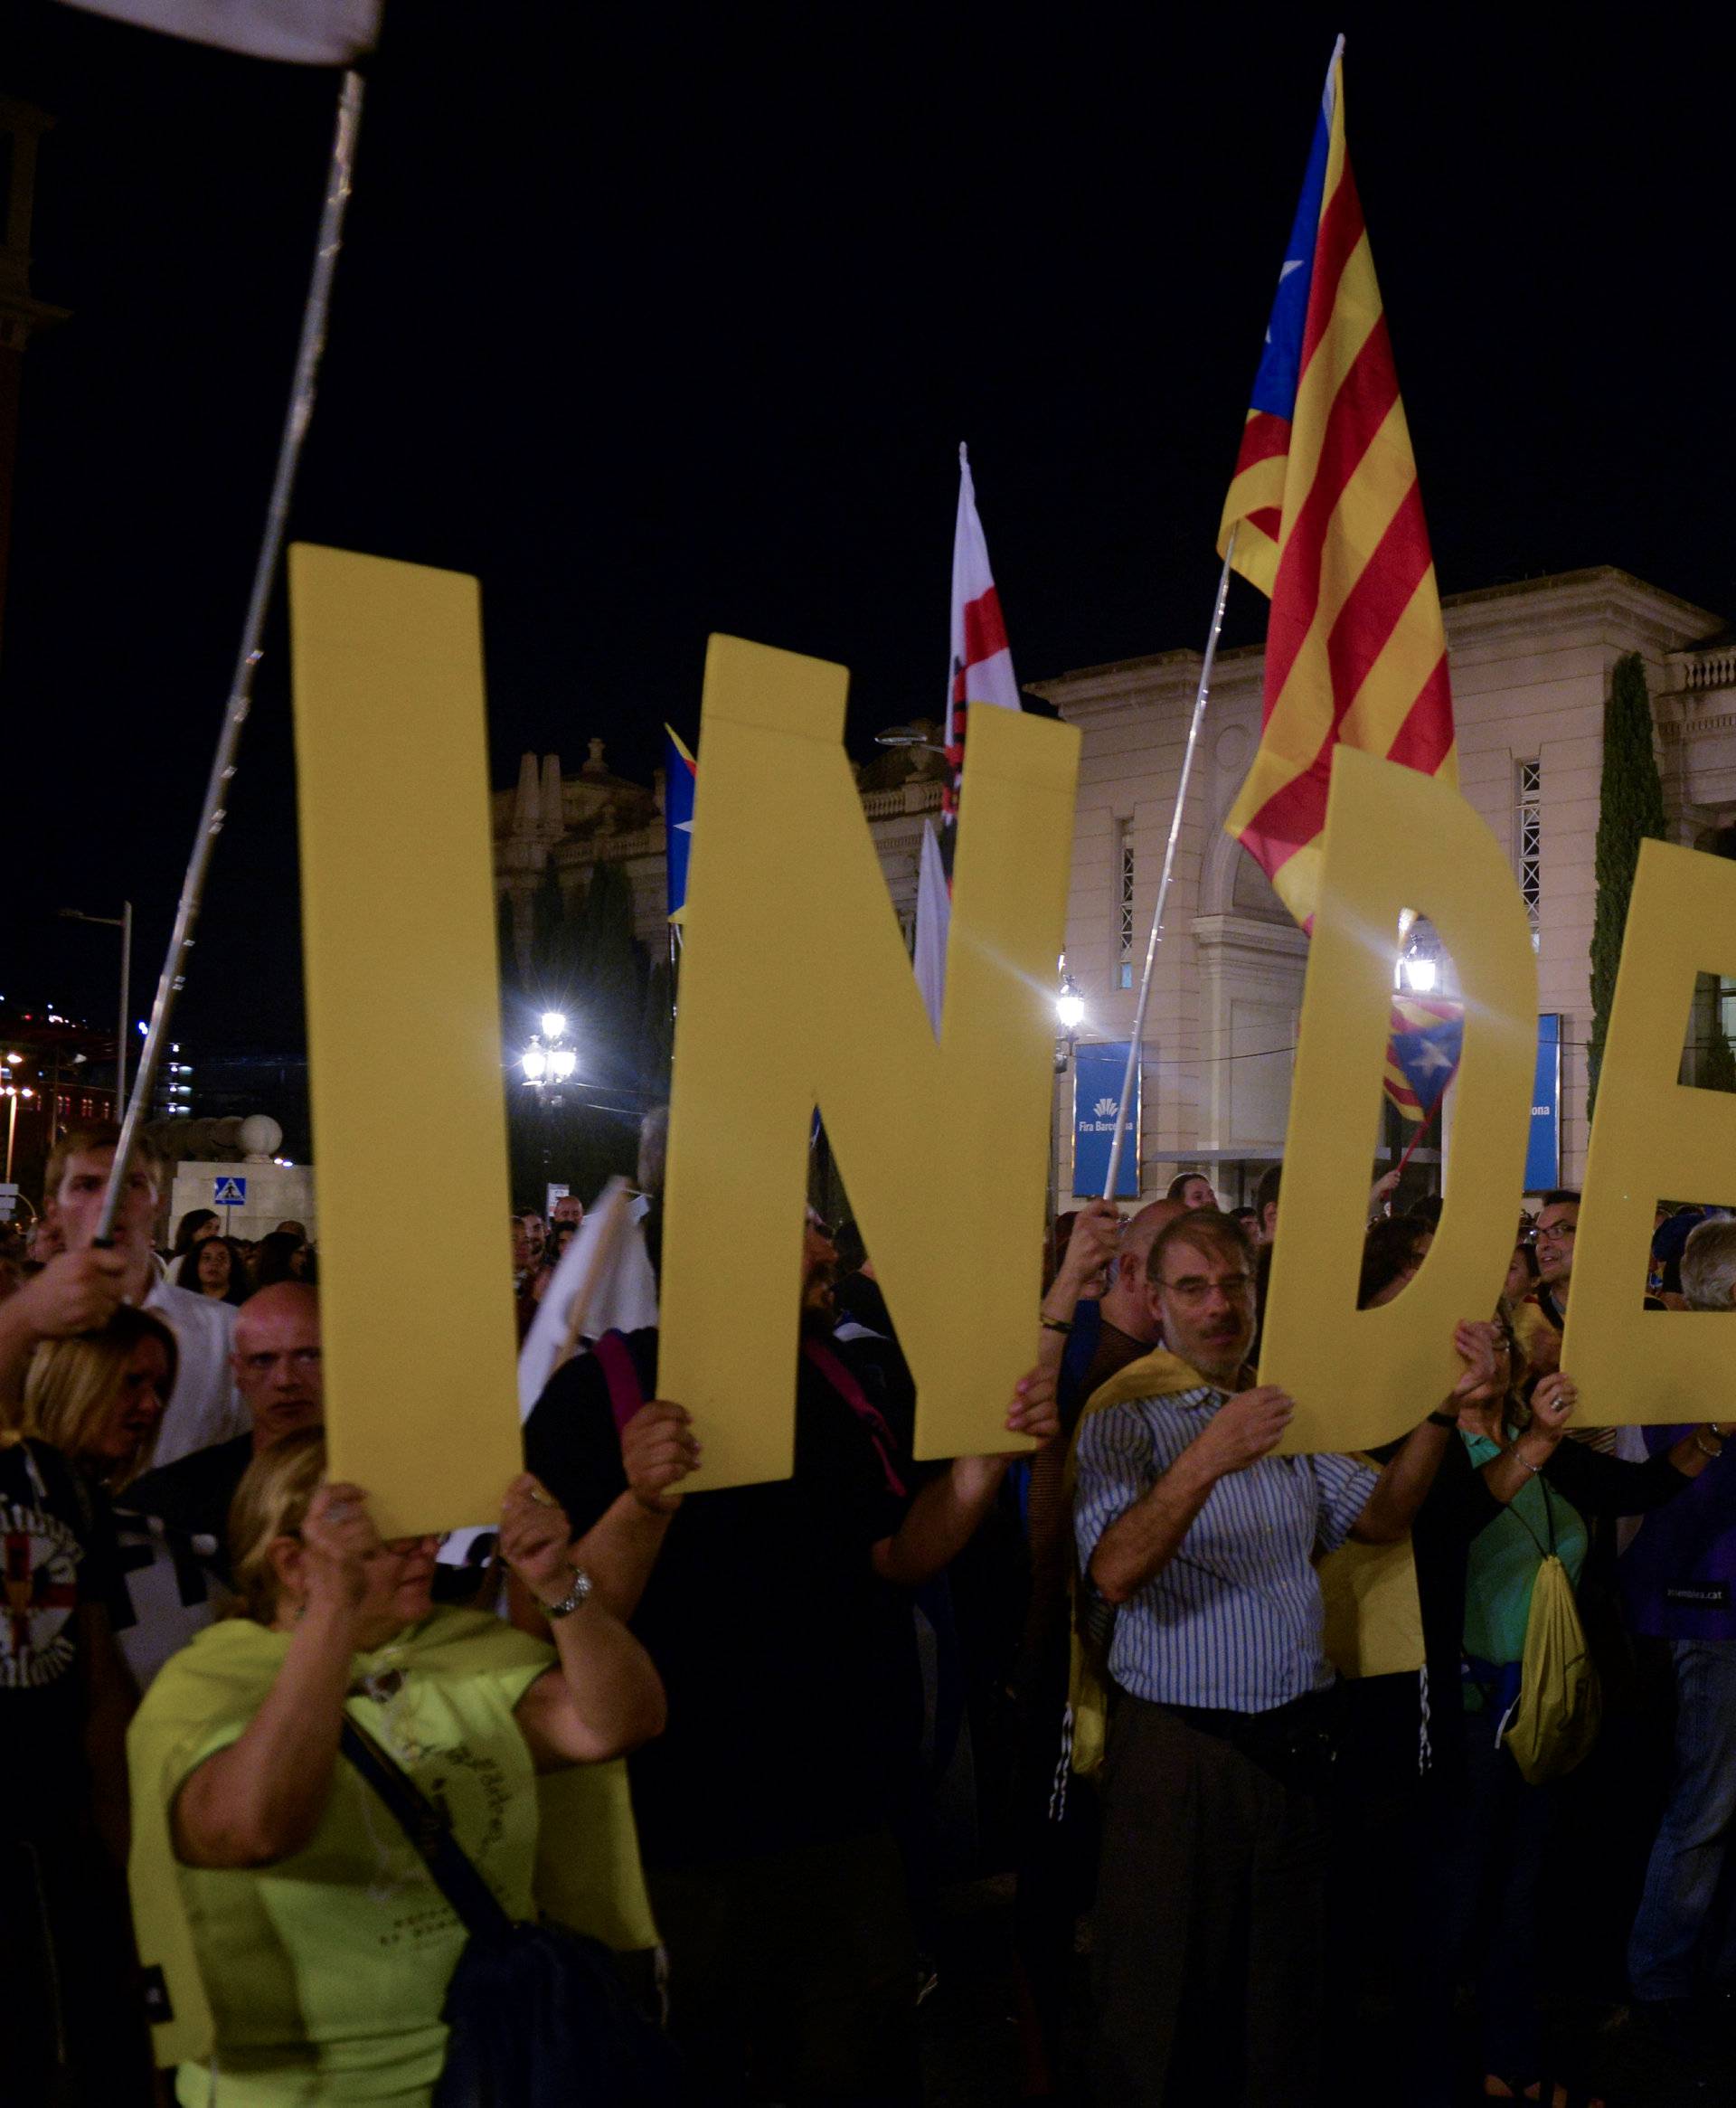 People hold letters to form the word "Independence" during a closing rally in favour of the banned October 1 independence referendum in Barcelona